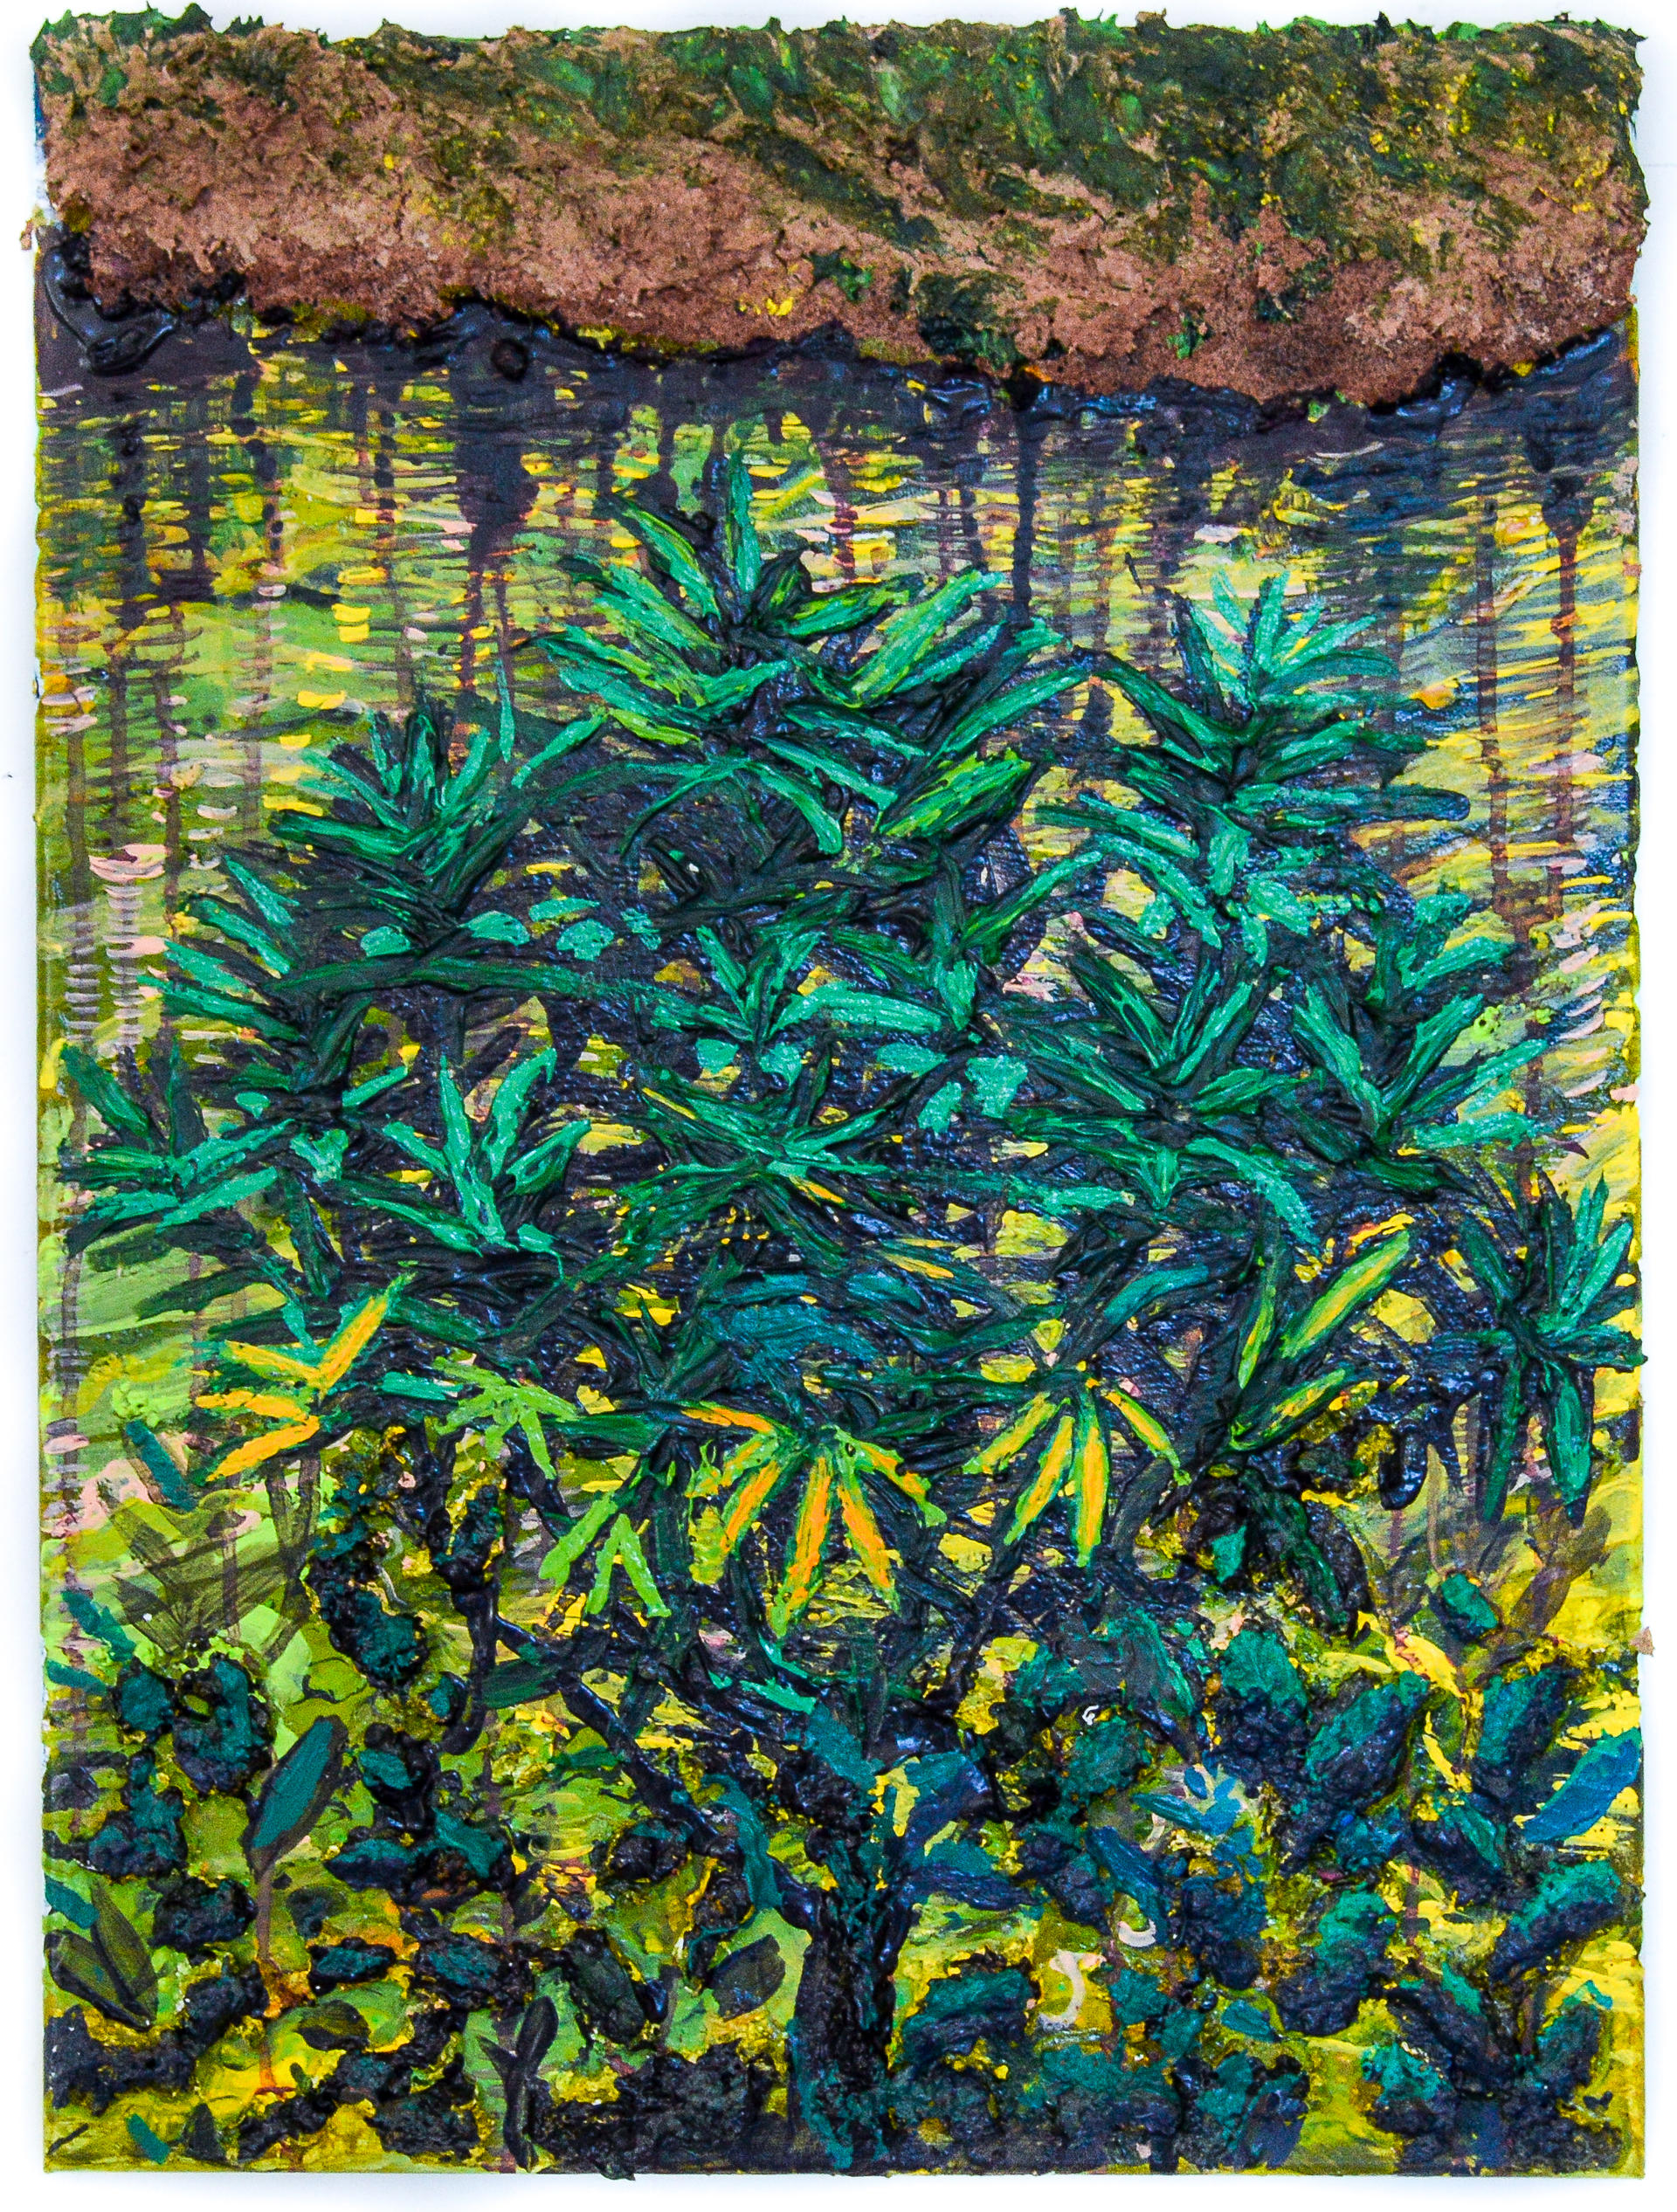 A painting of a cannabis plant in front of a body of water